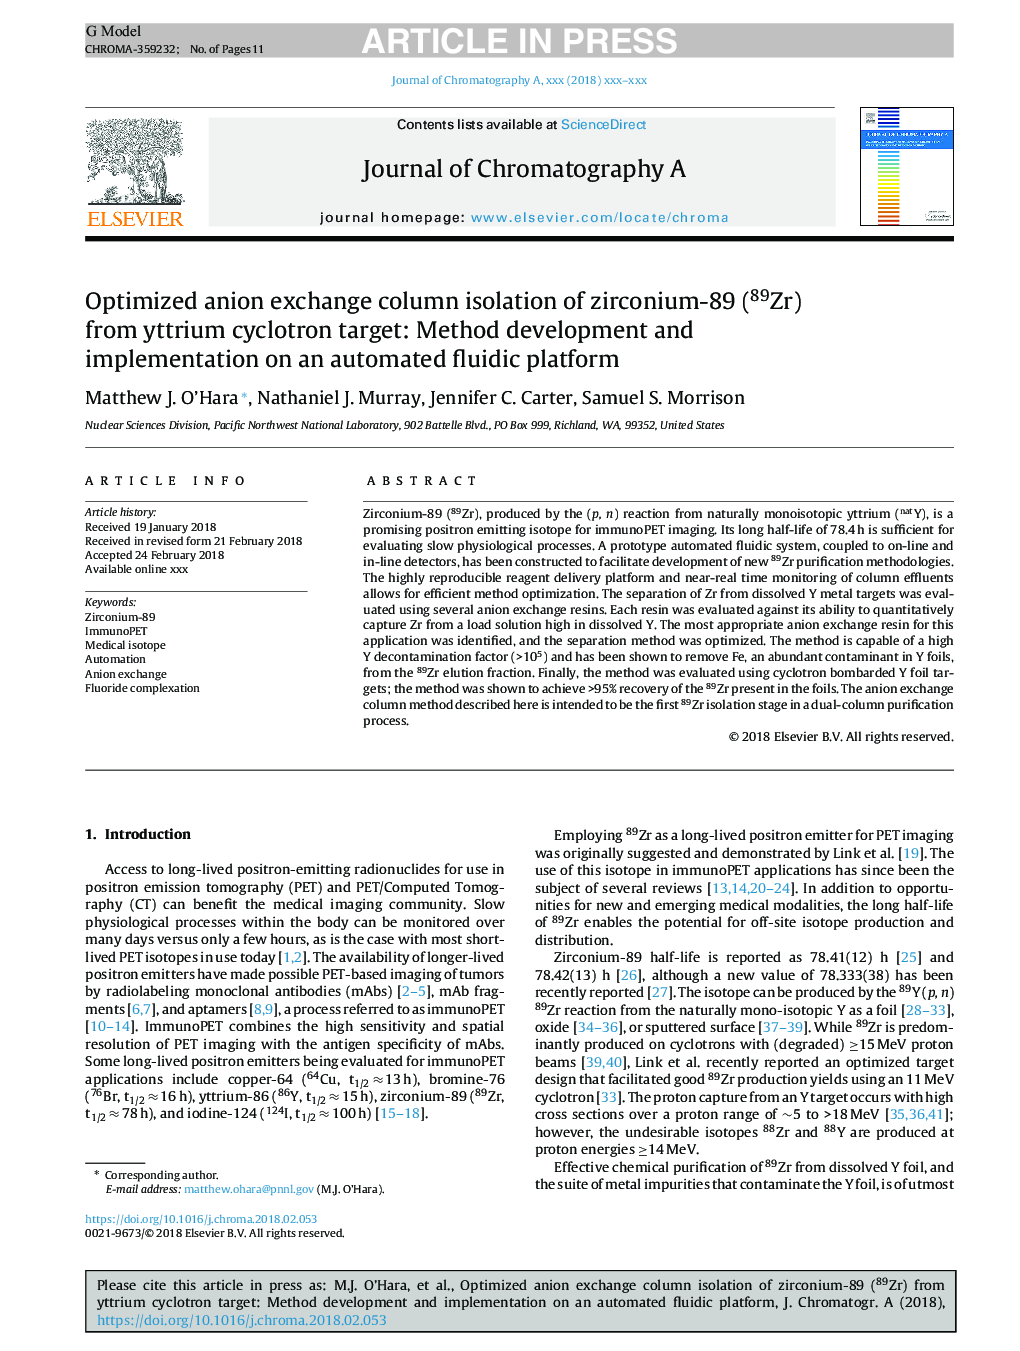 Optimized anion exchange column isolation of zirconium-89 (89Zr) from yttrium cyclotron target: Method development and implementation on an automated fluidic platform